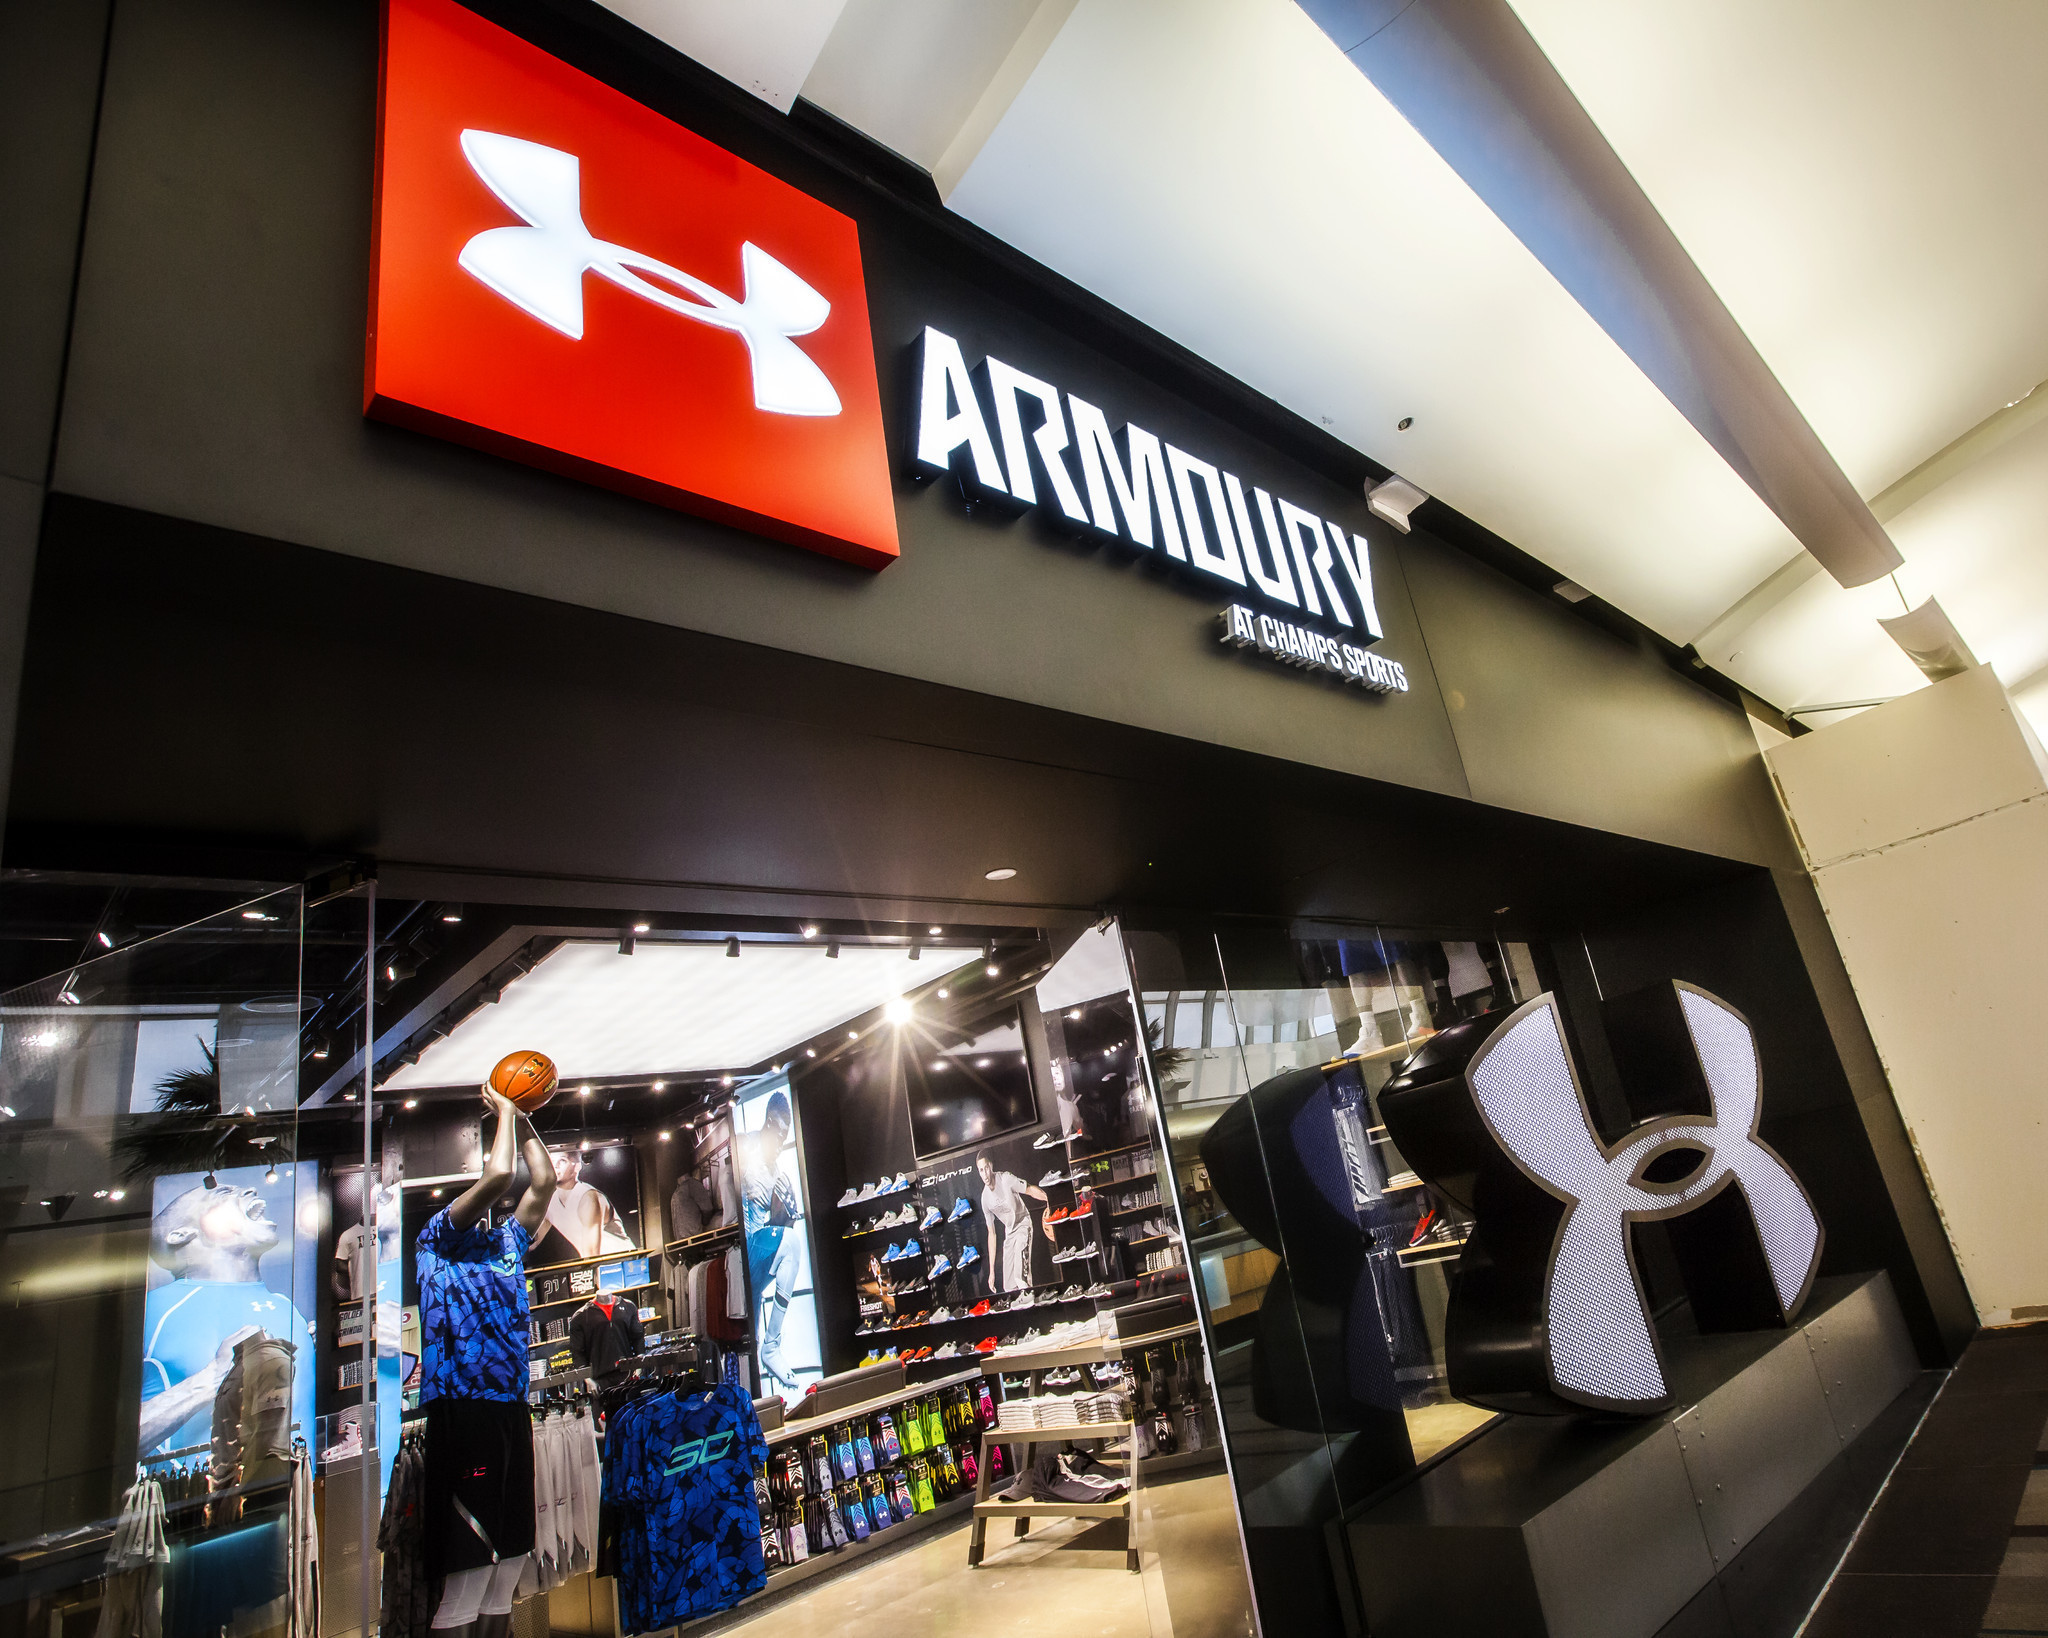 Under Armour shares plunge on sales and earnings miss - Baltimore Sun